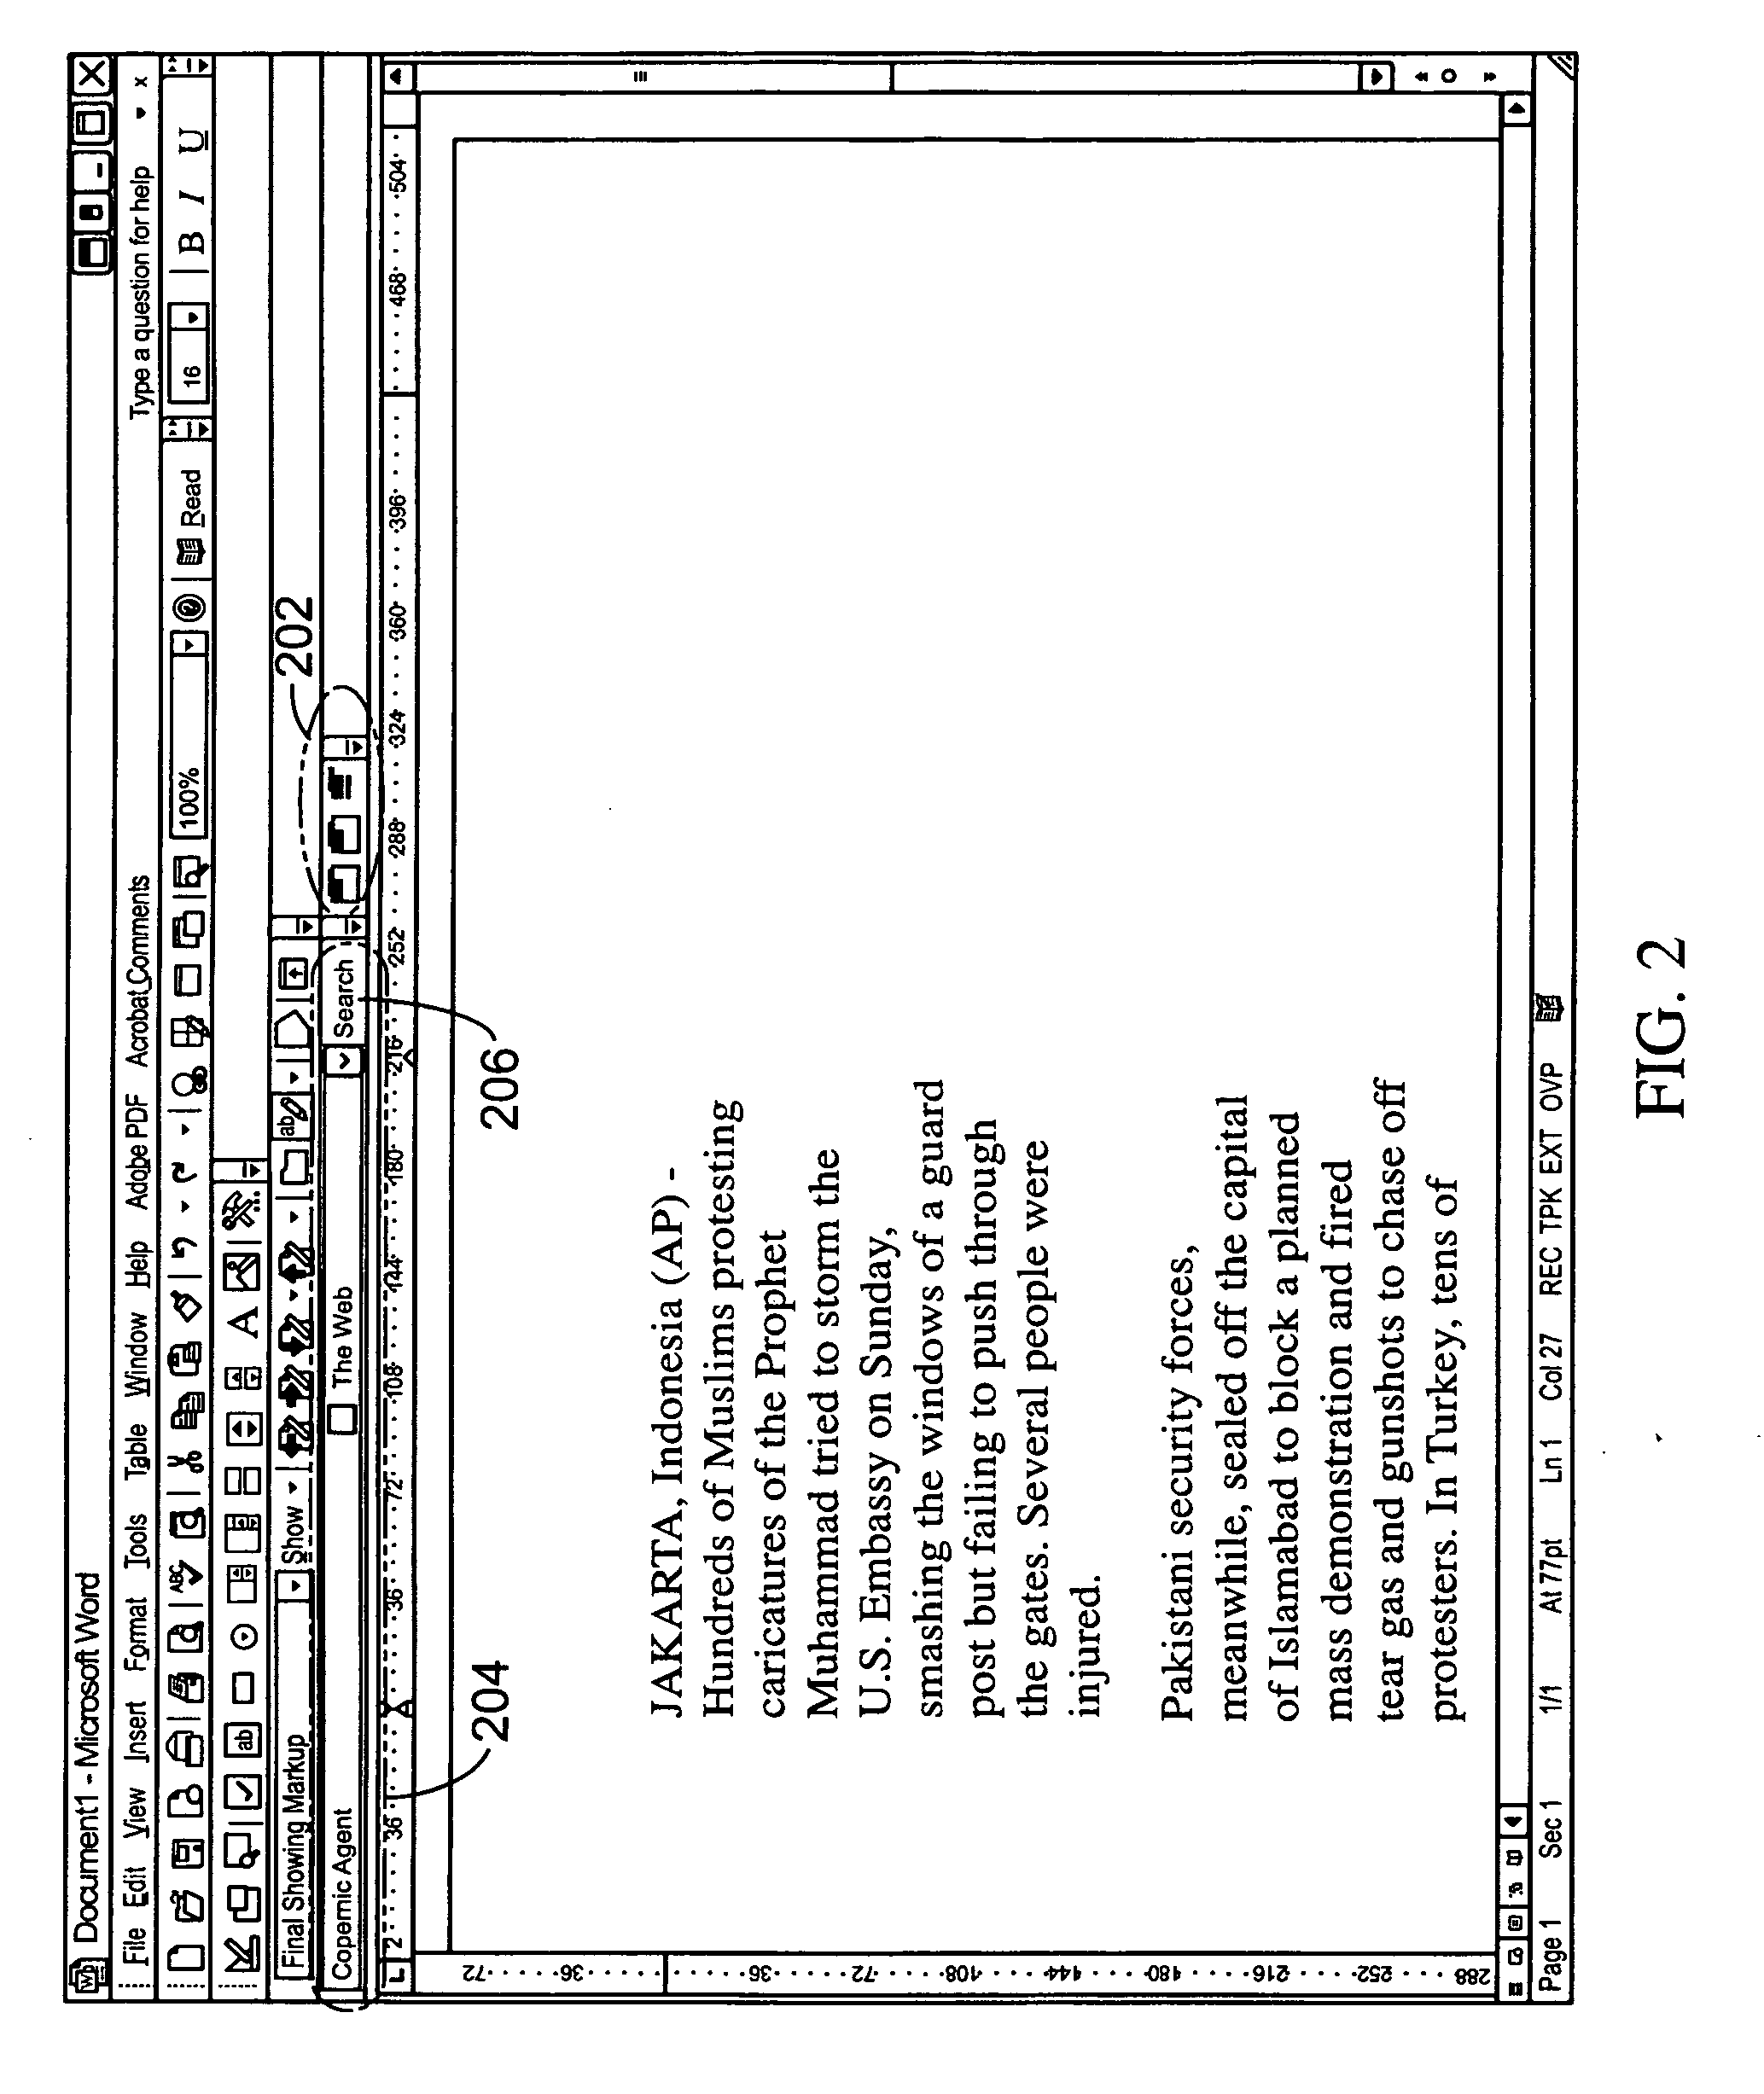 System, methods and applications for embedded internet searching and result display